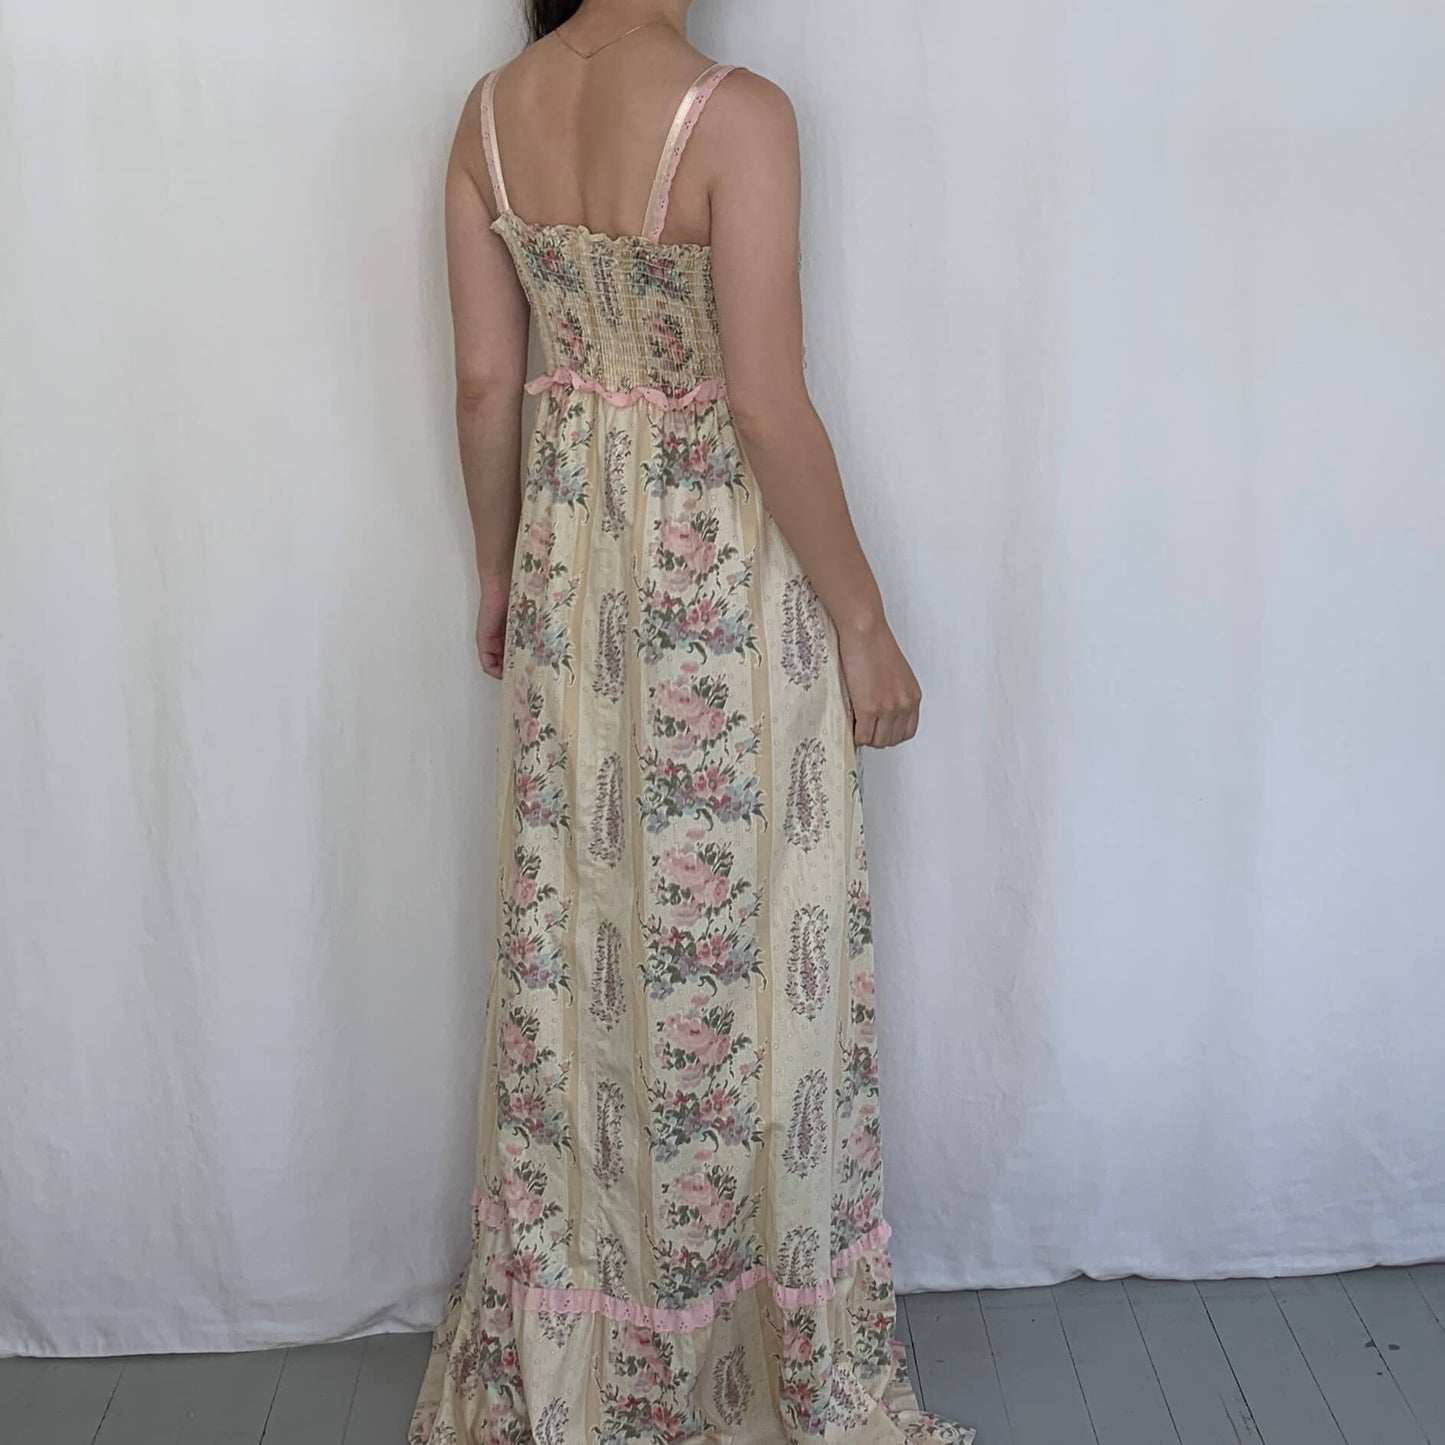 back view of the vintage sundress